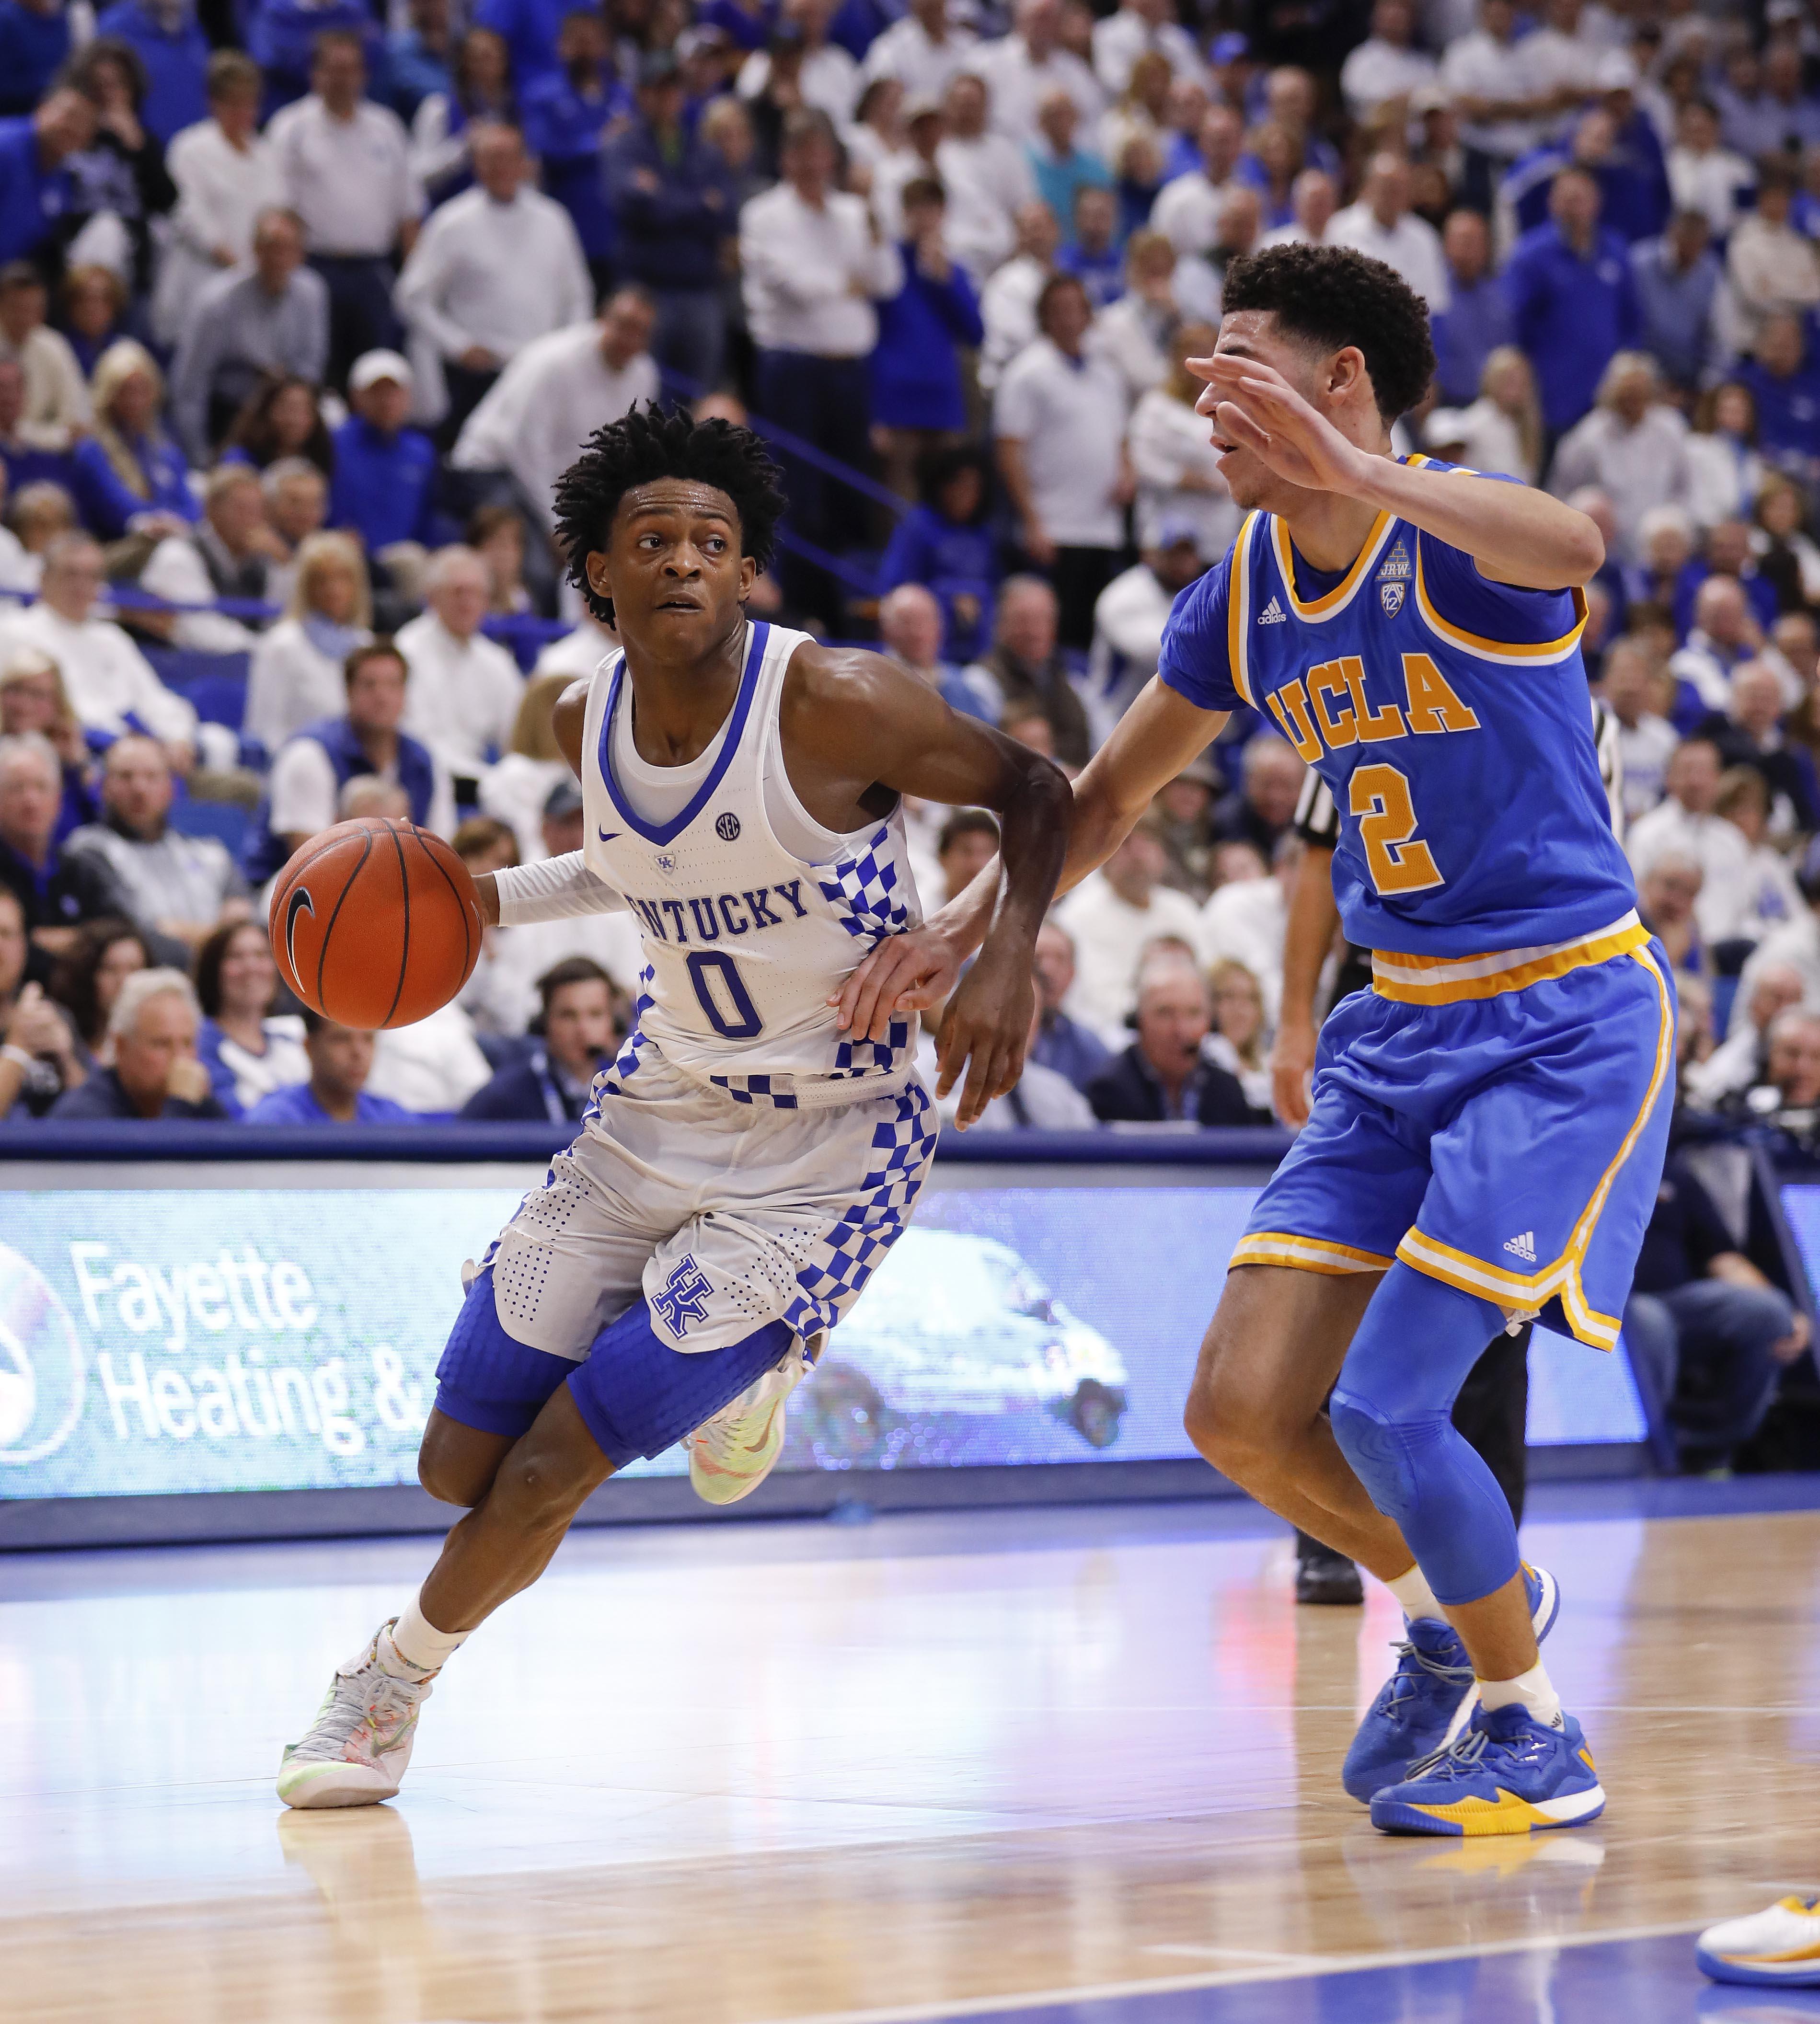 UCLA will probably need to play its best defense of the season tonight to beat Kentucky again.